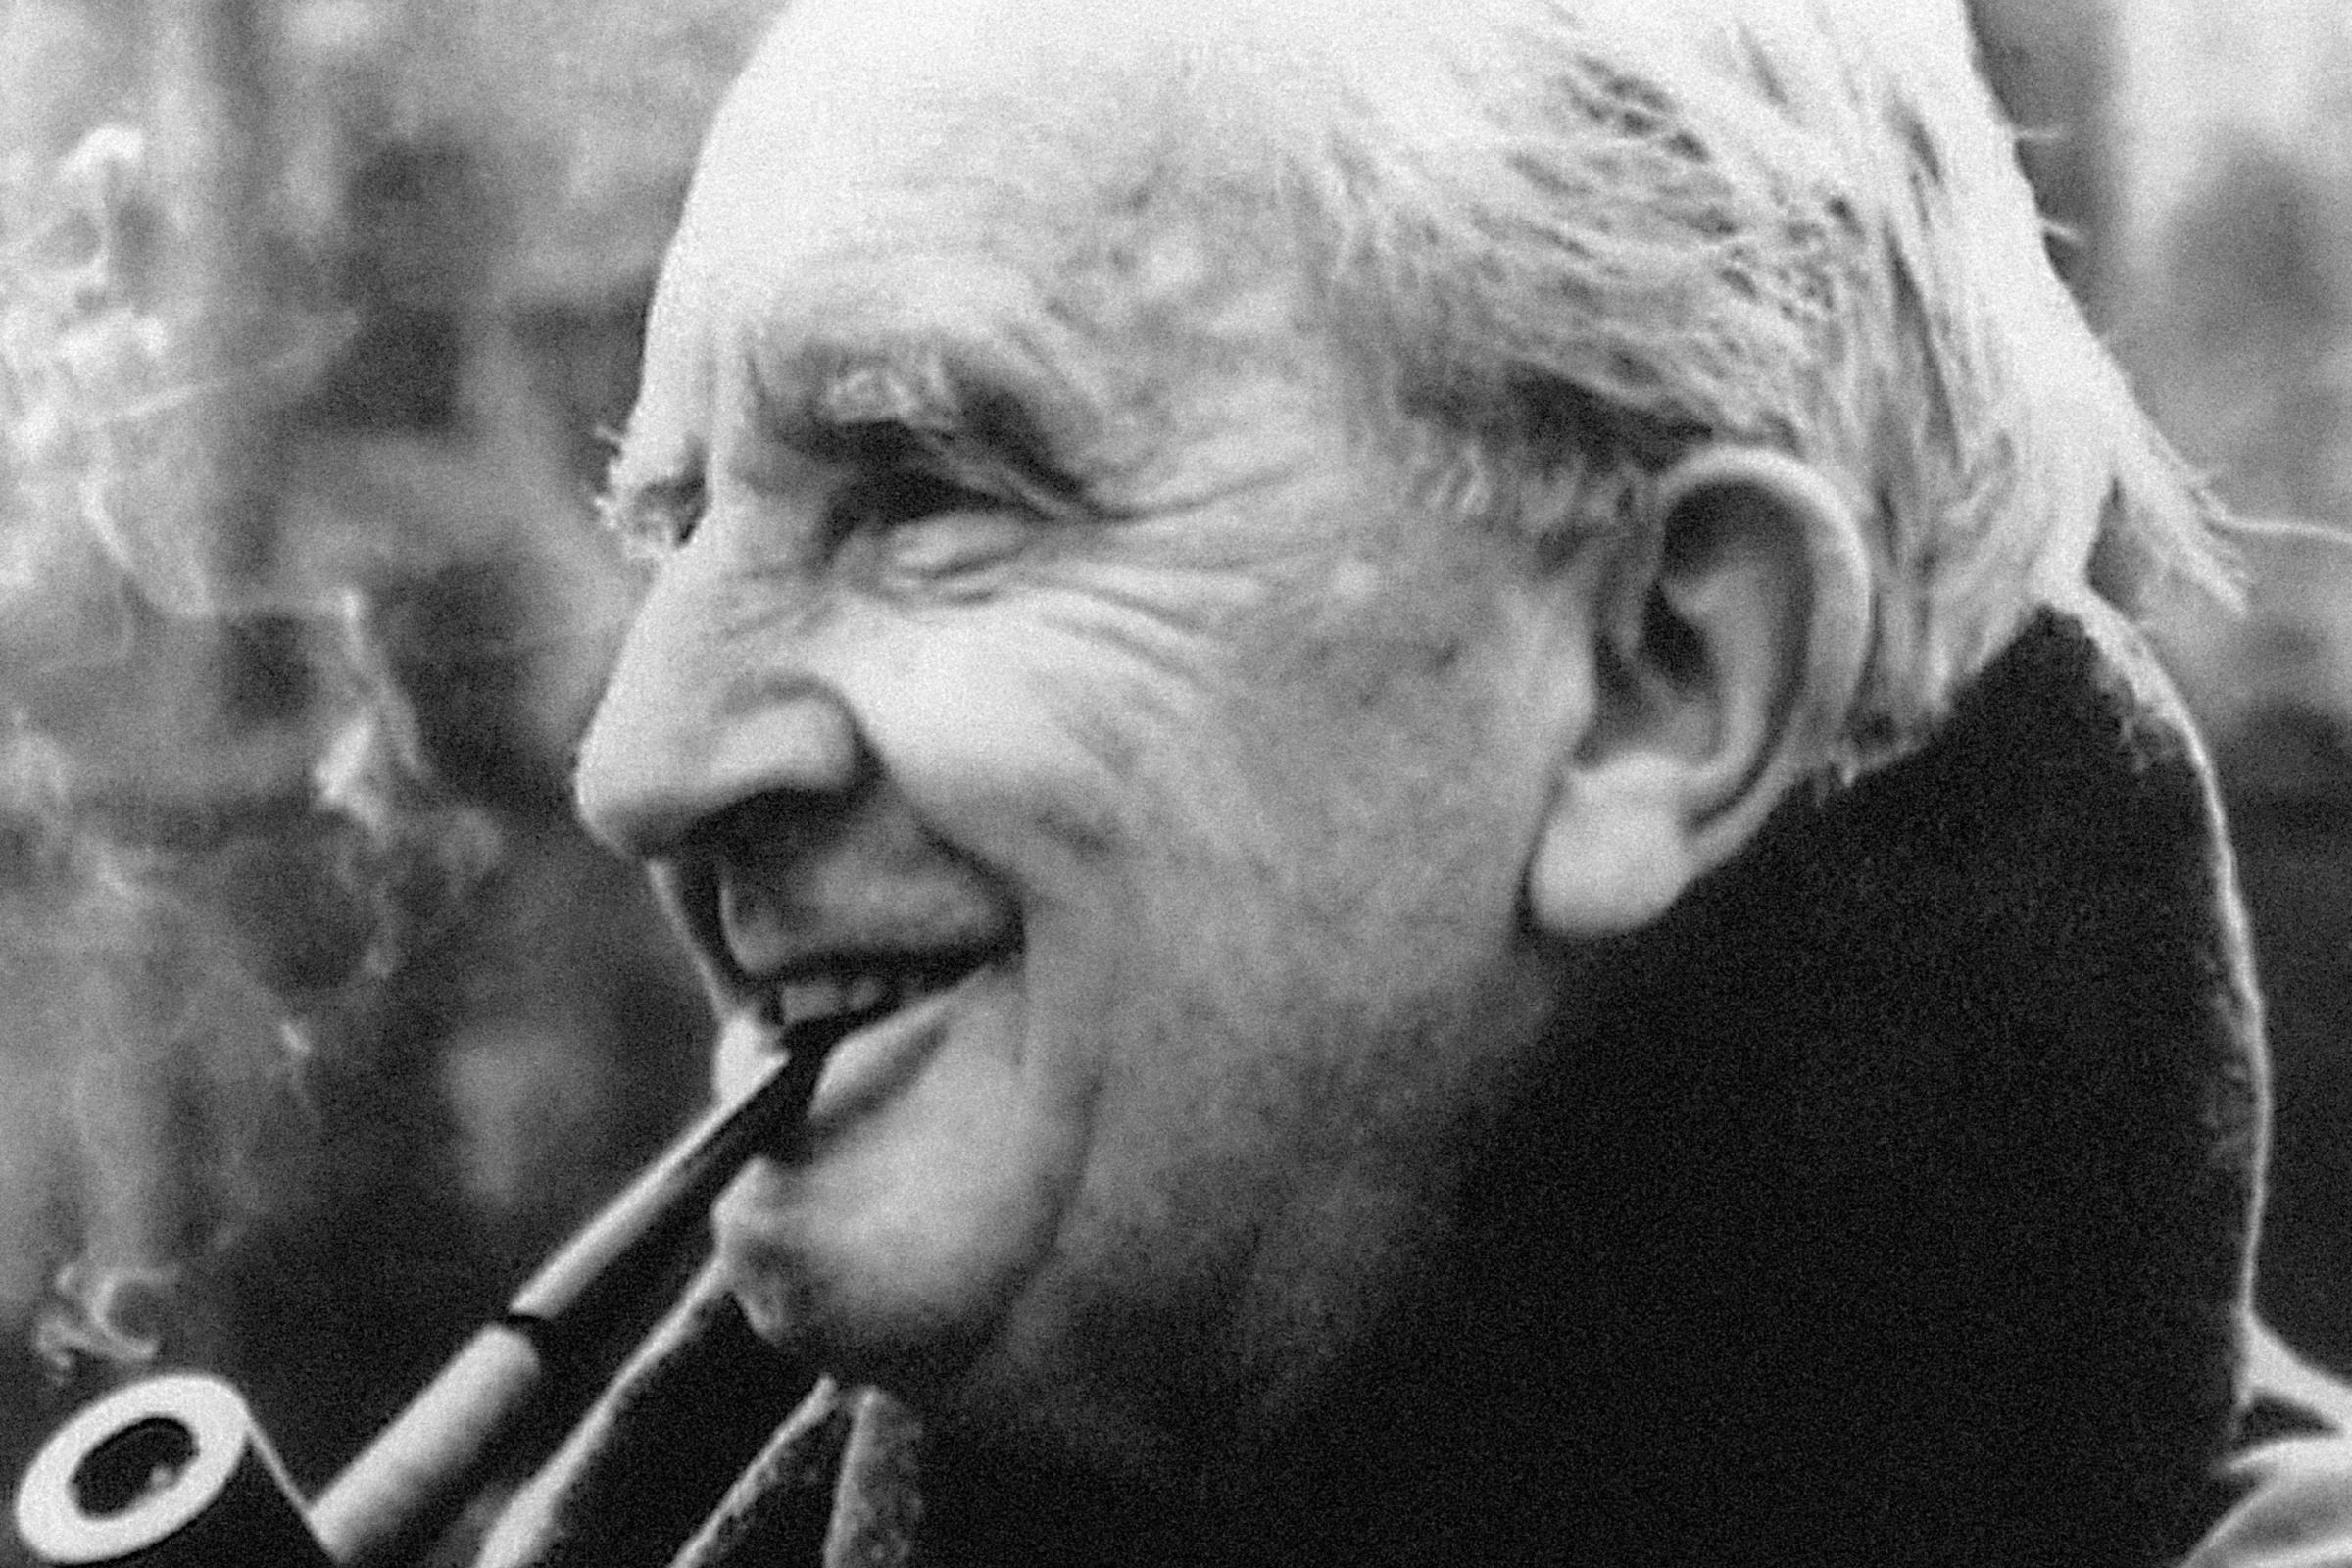 Family of JRR Tolkien do not approve of new biopic